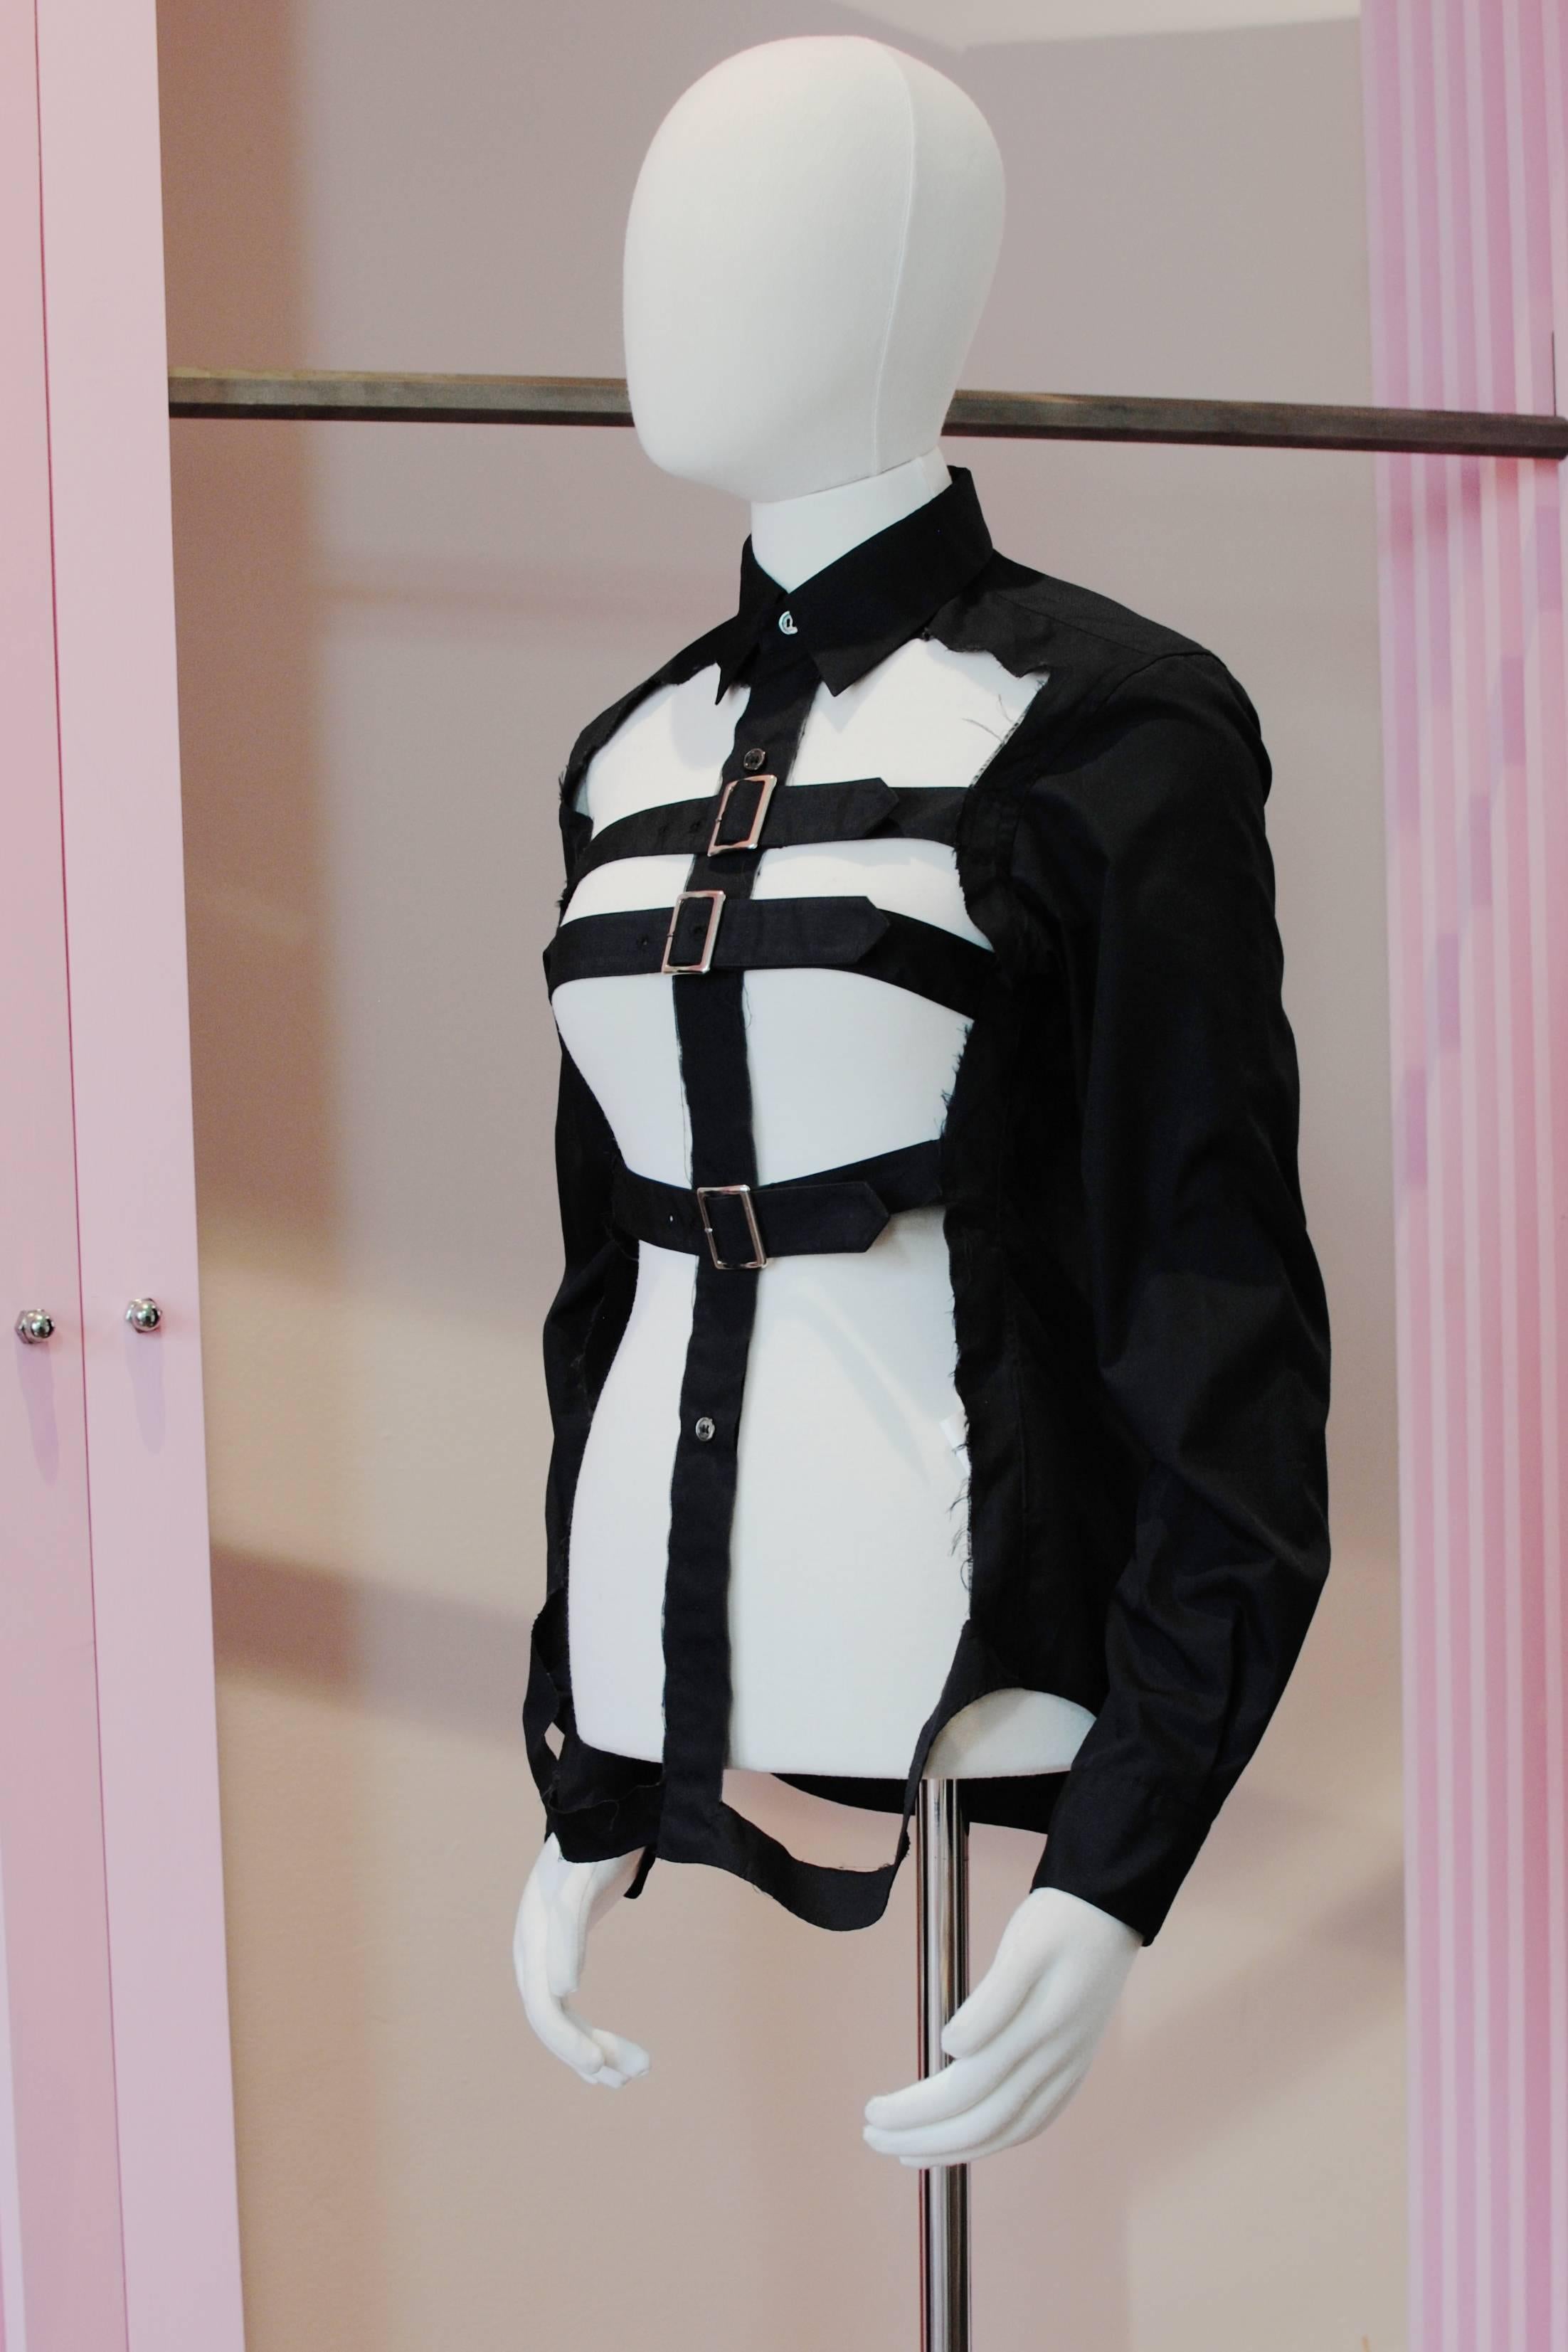 COMME des GARÇONS black cut-out cage shirt from the 2008 Autumn/Winter collection. It features a classic collar, full length sleeves and buckle fastening.

Size — Small
Shoulder — 39 cm
Chest — 40 cm
Sleeve — 60 cm
Length — 70 cm 

Material